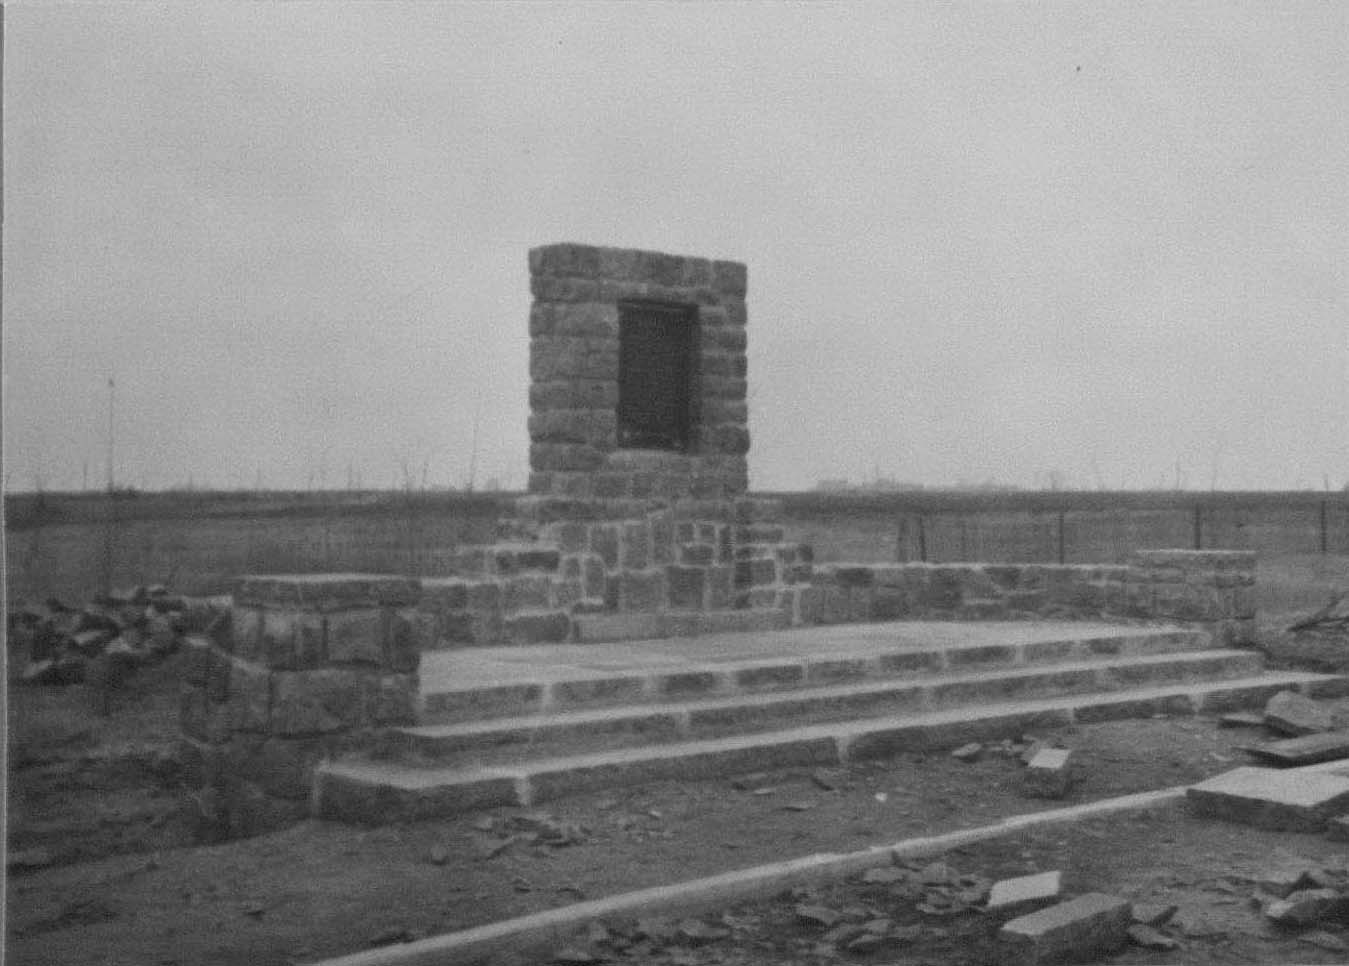 Historic photo by Olson from 1940. The marker was nearly complete.